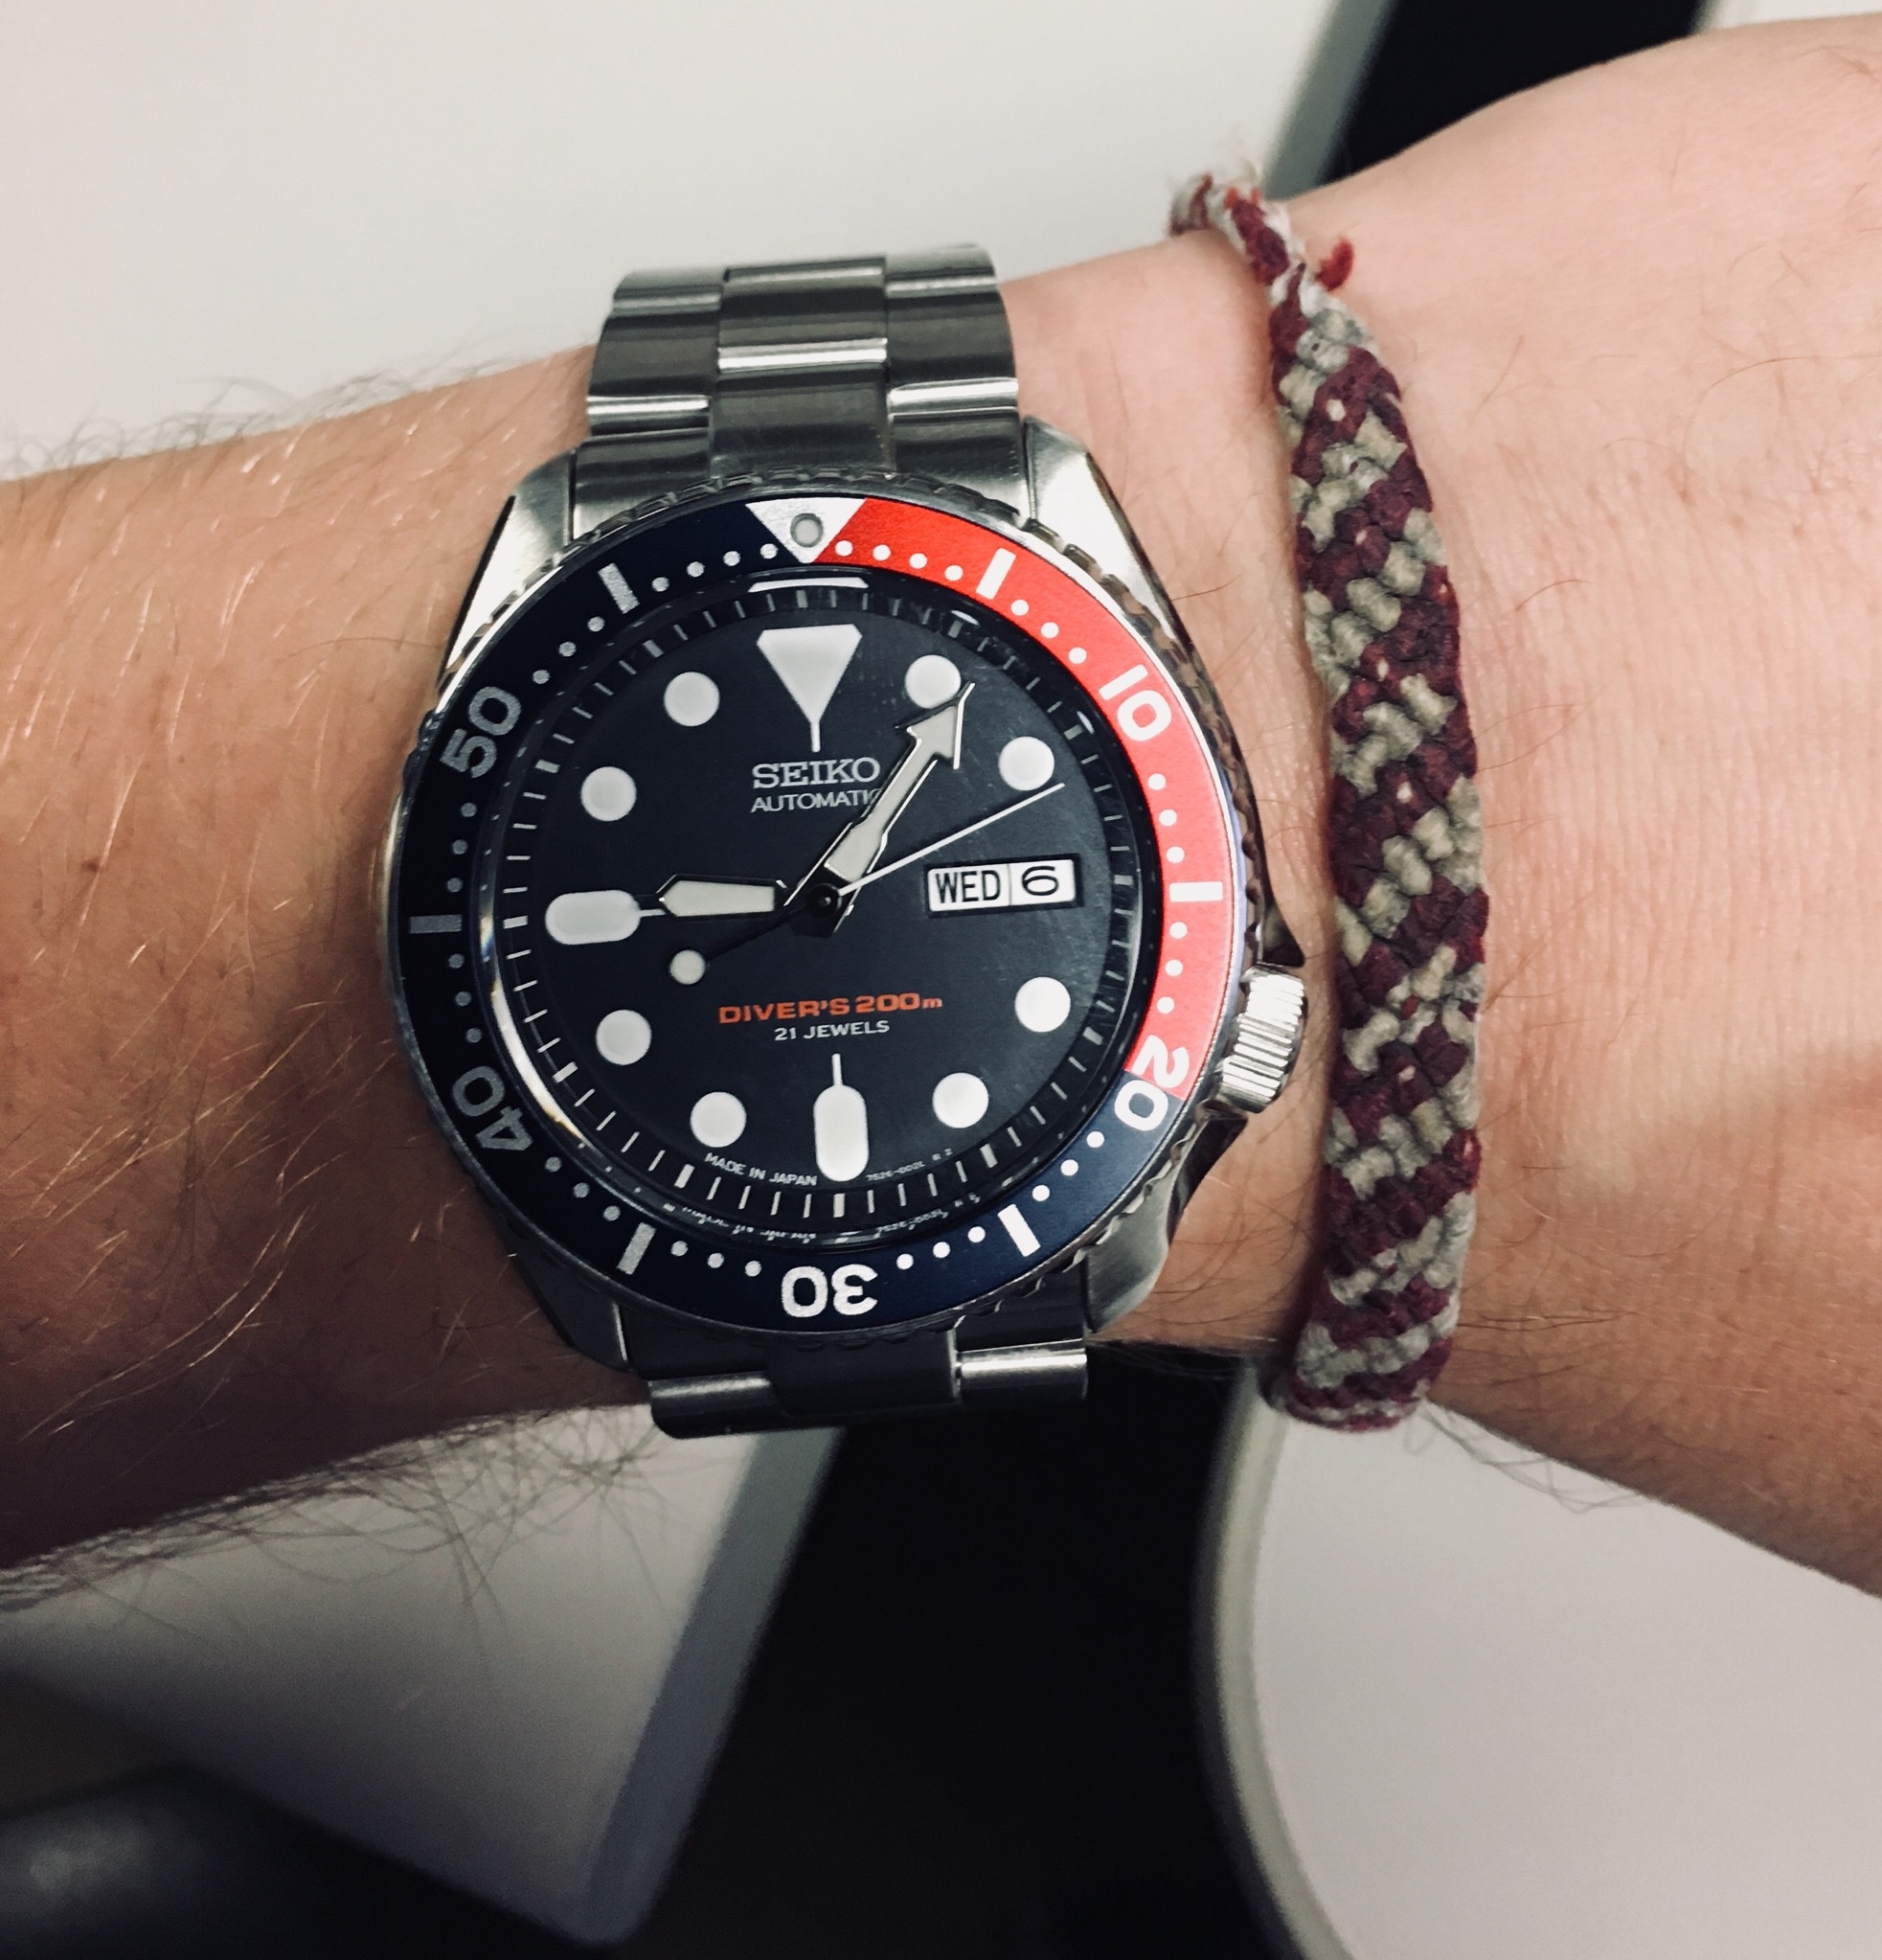 Starting Time: Building an Outfit Around a Seiko Dive Watch | Primer